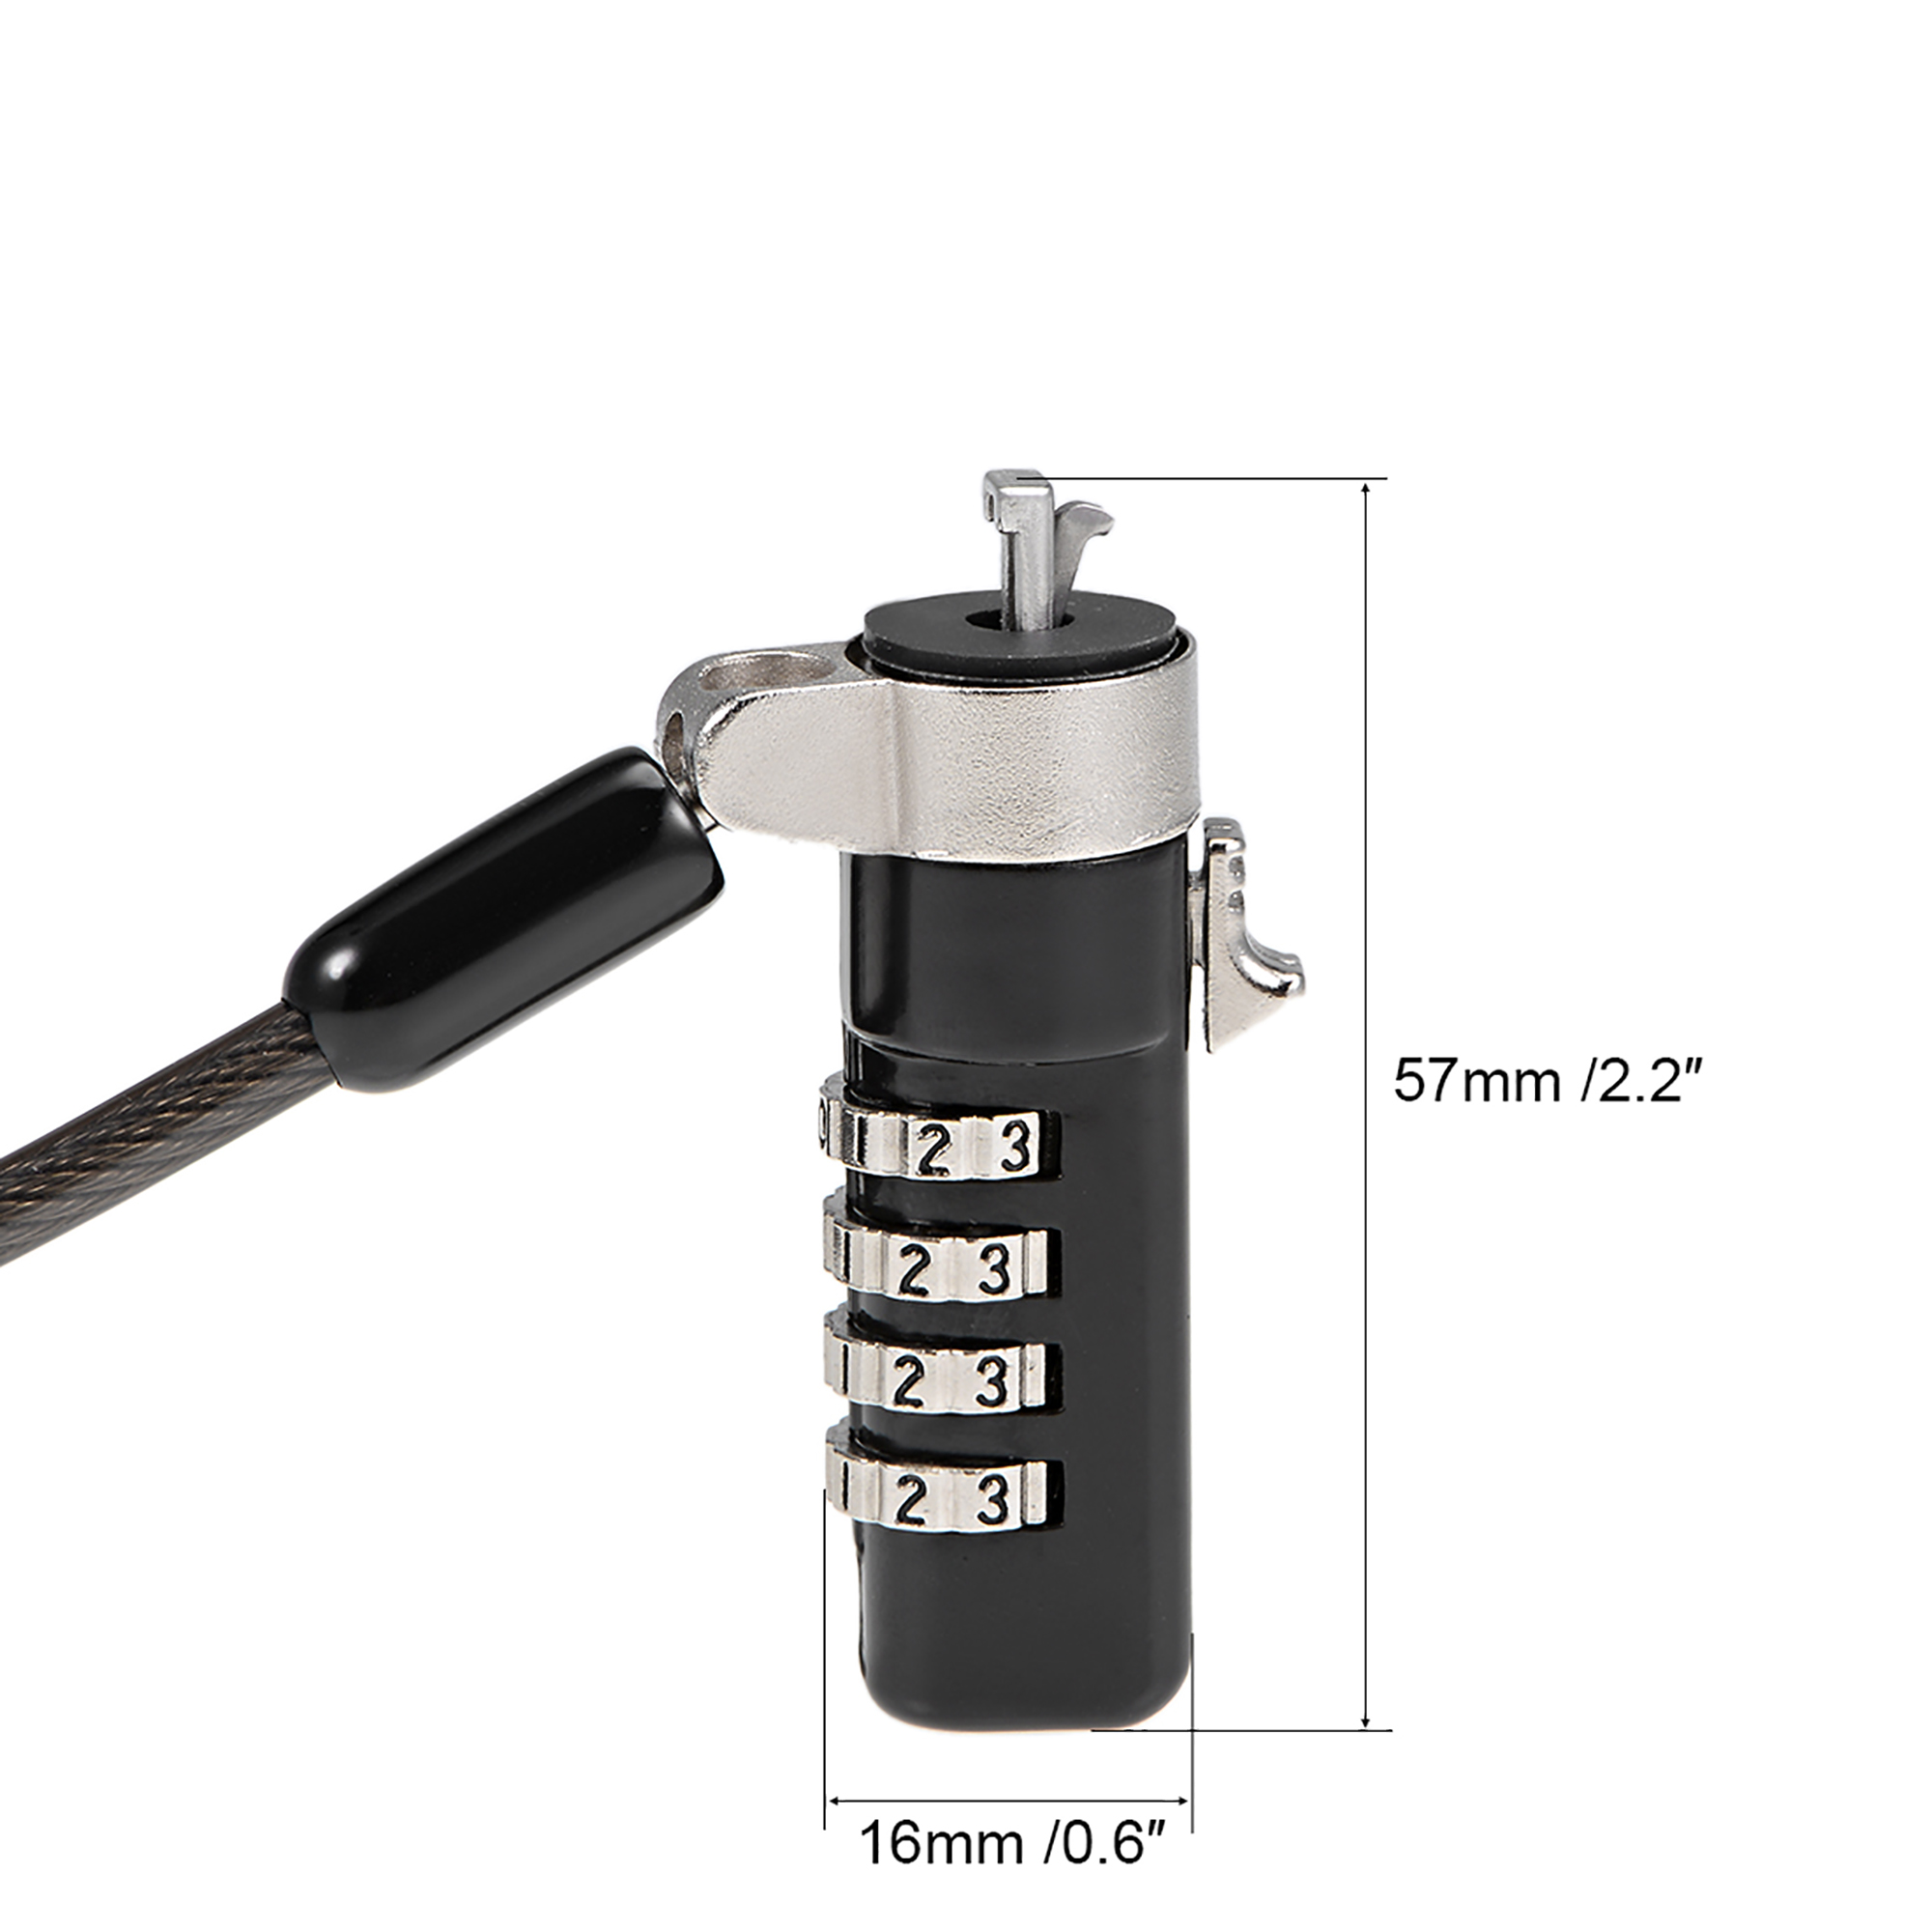 Notebook Laptop 4 Digit Combination Lock 1.8M Steel Keyed Safety Cable Wedge Locking Head for 5x3mm Hole - image 3 of 4